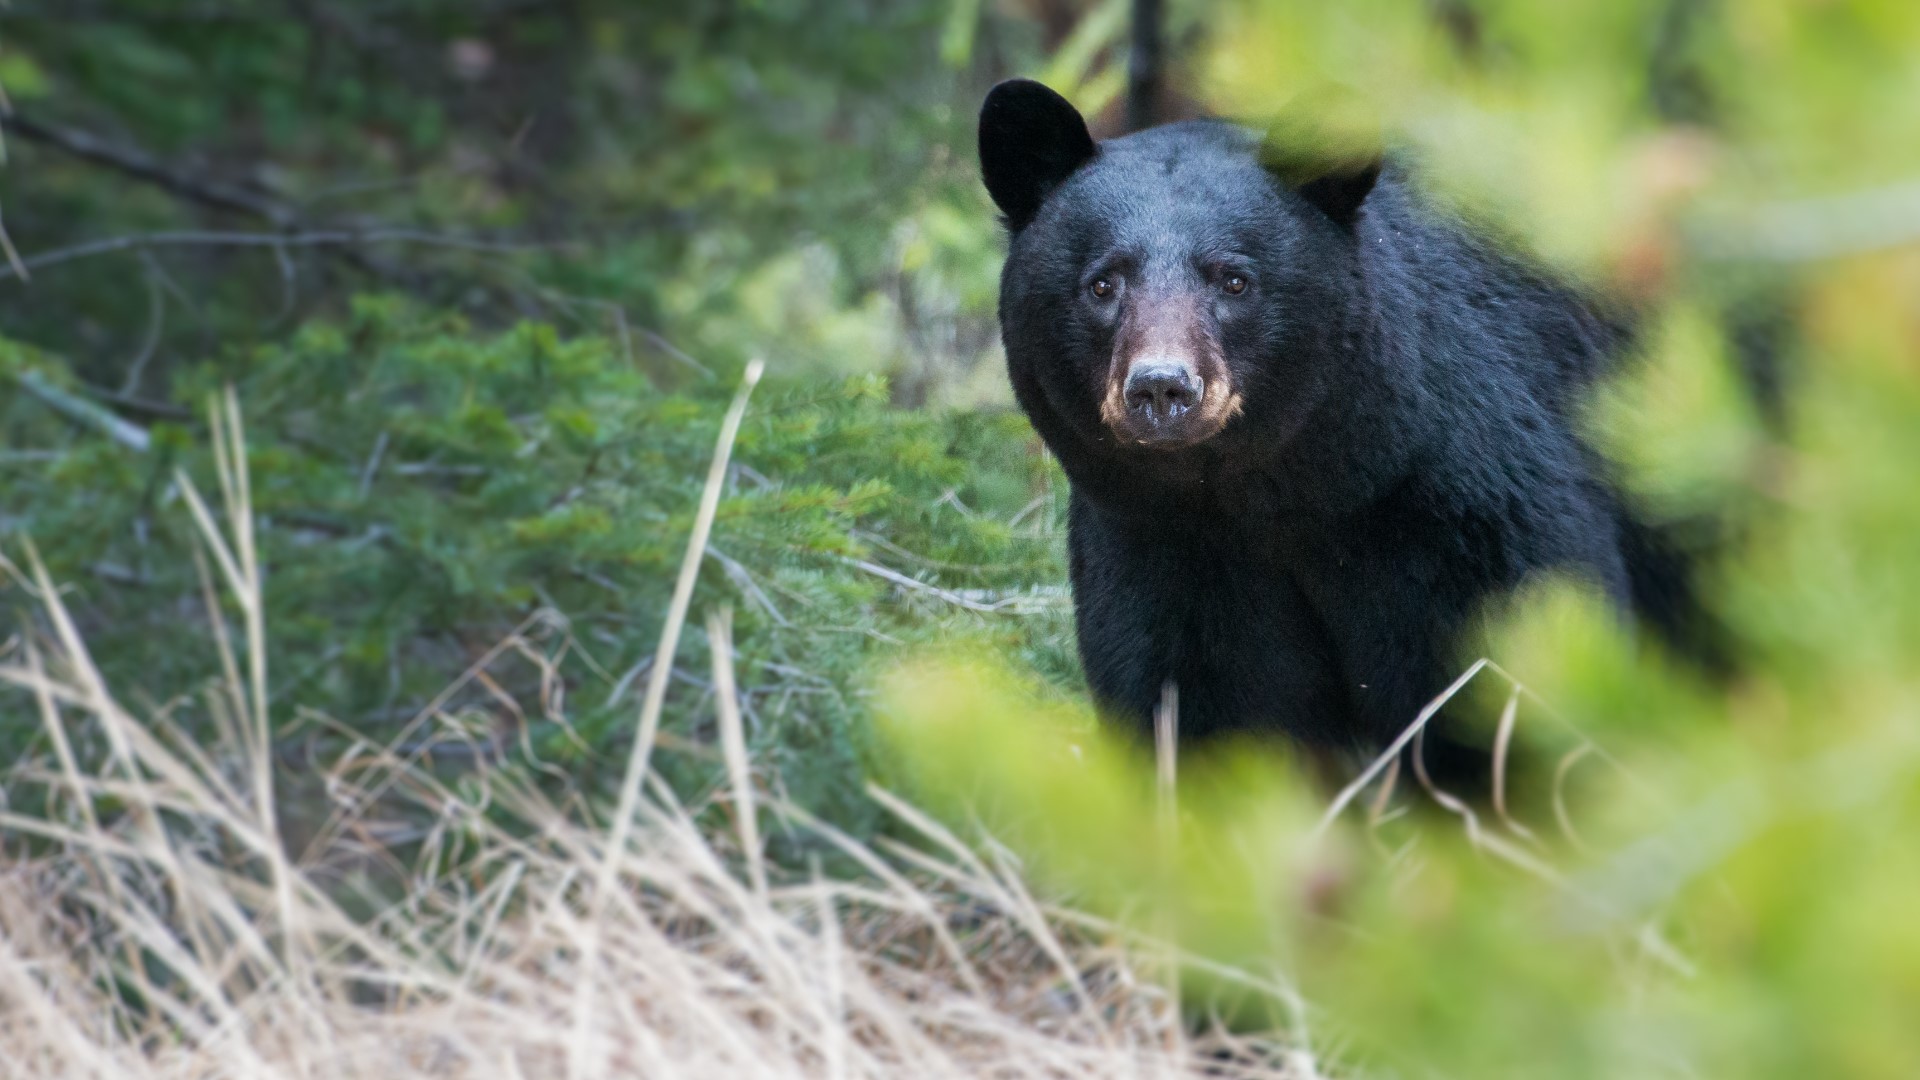 The woman confronted the bear head-on after her dog was chased by the bear, state wildlife officials said.